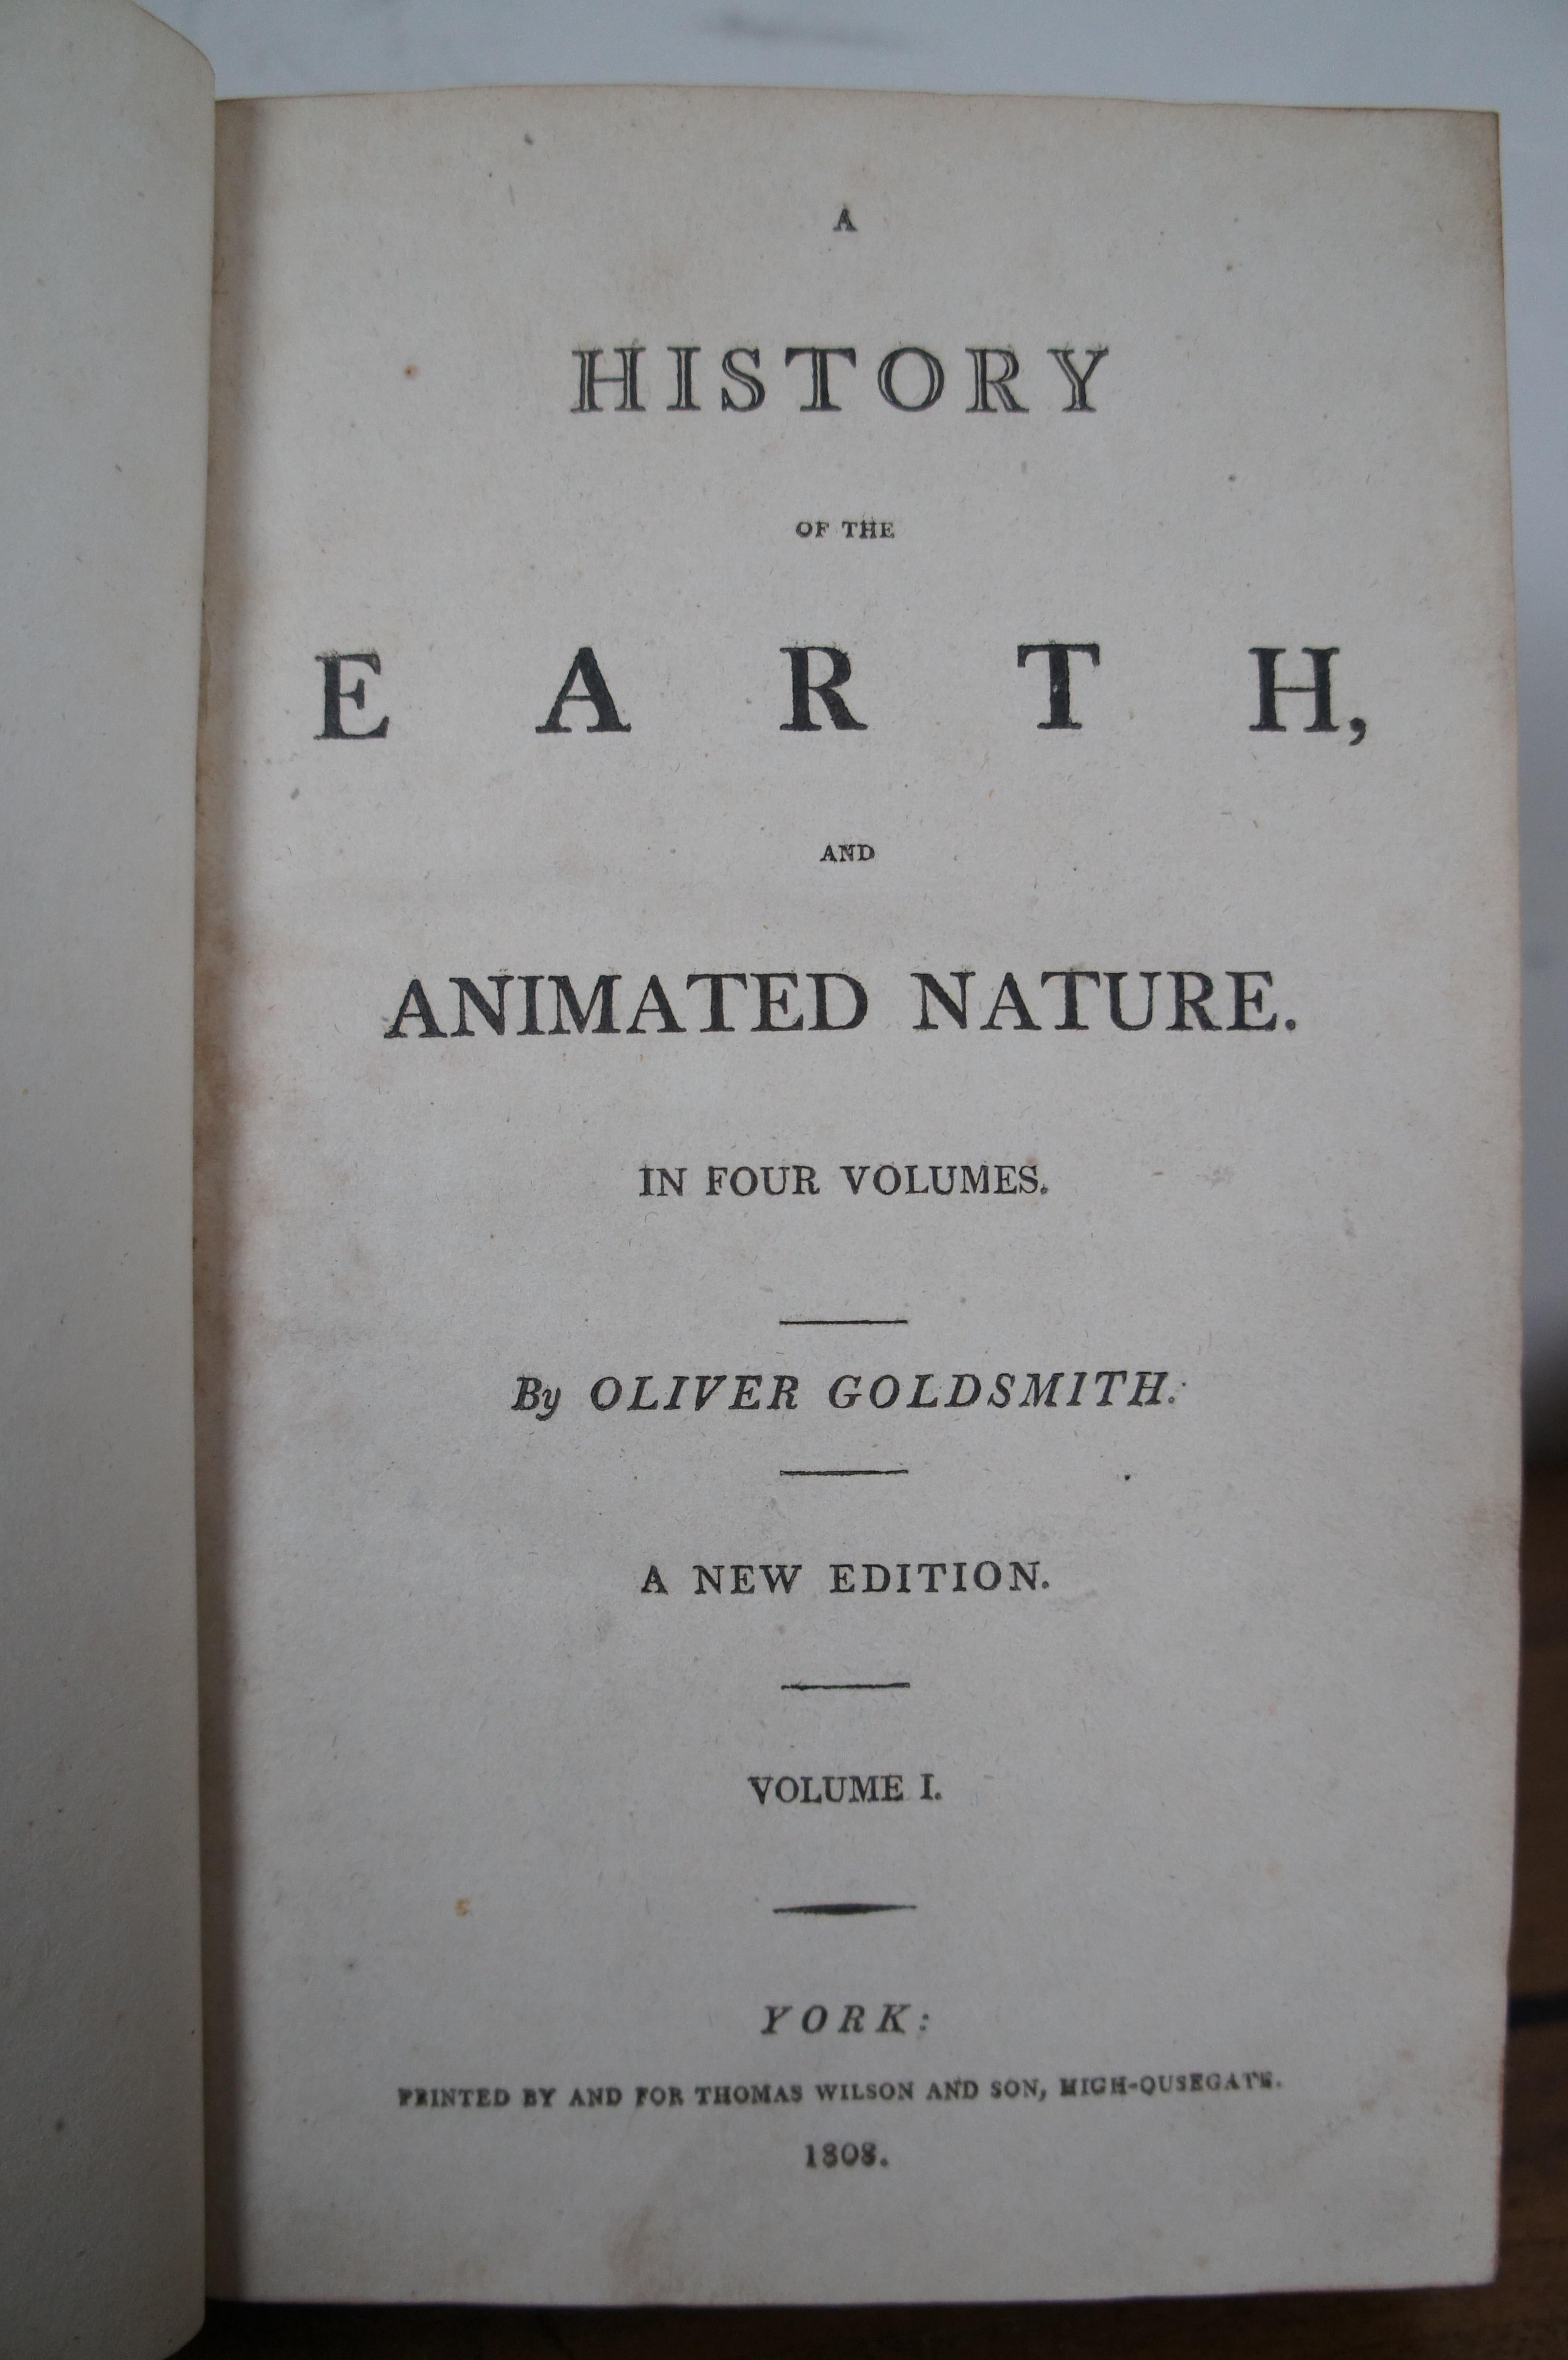 4 Antique 1808 Goldsmiths History of Earth Animated Nature Leather Book Vol I-IV For Sale 7